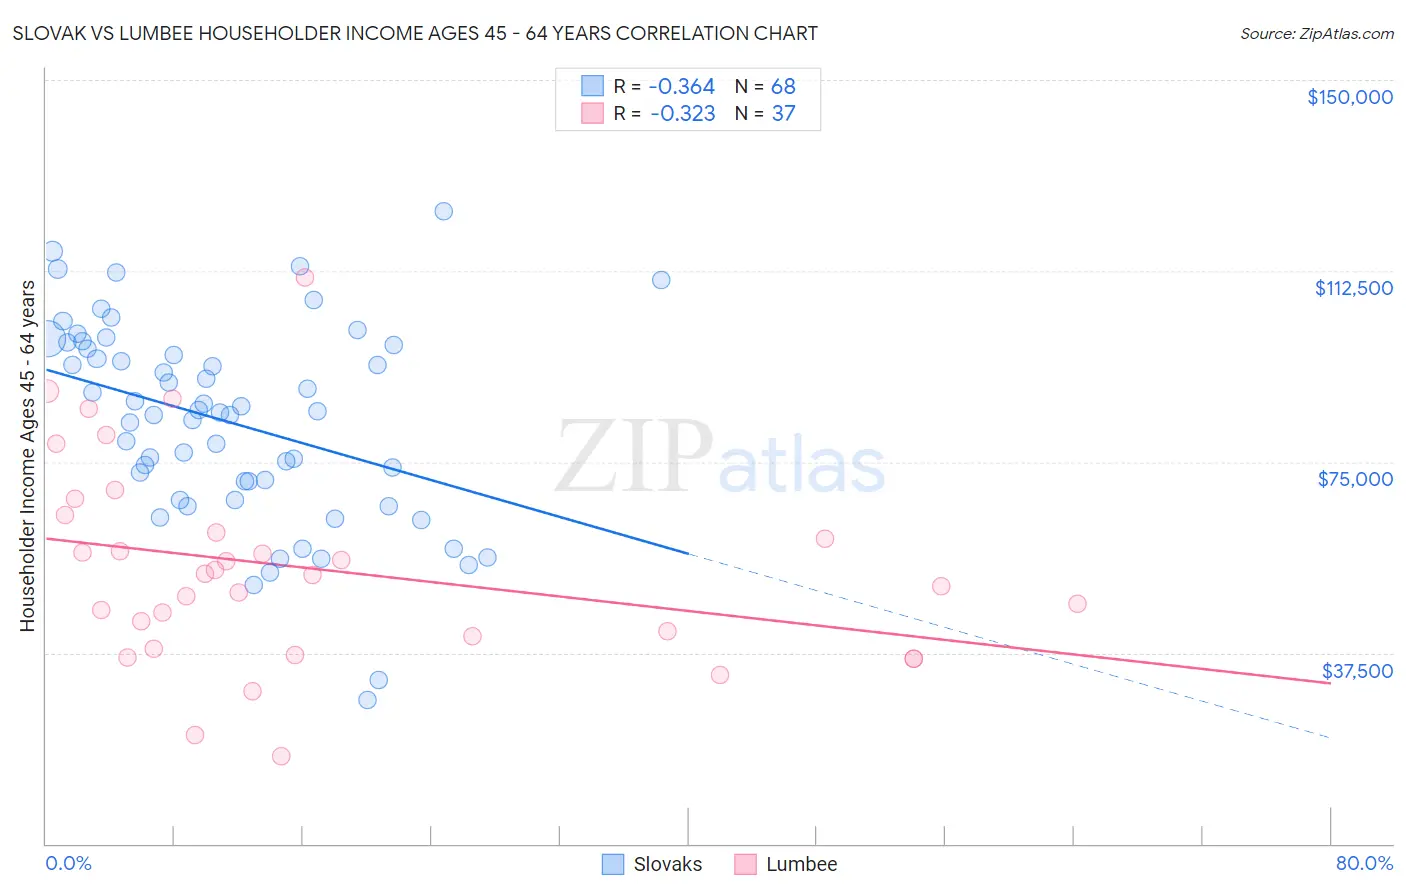 Slovak vs Lumbee Householder Income Ages 45 - 64 years